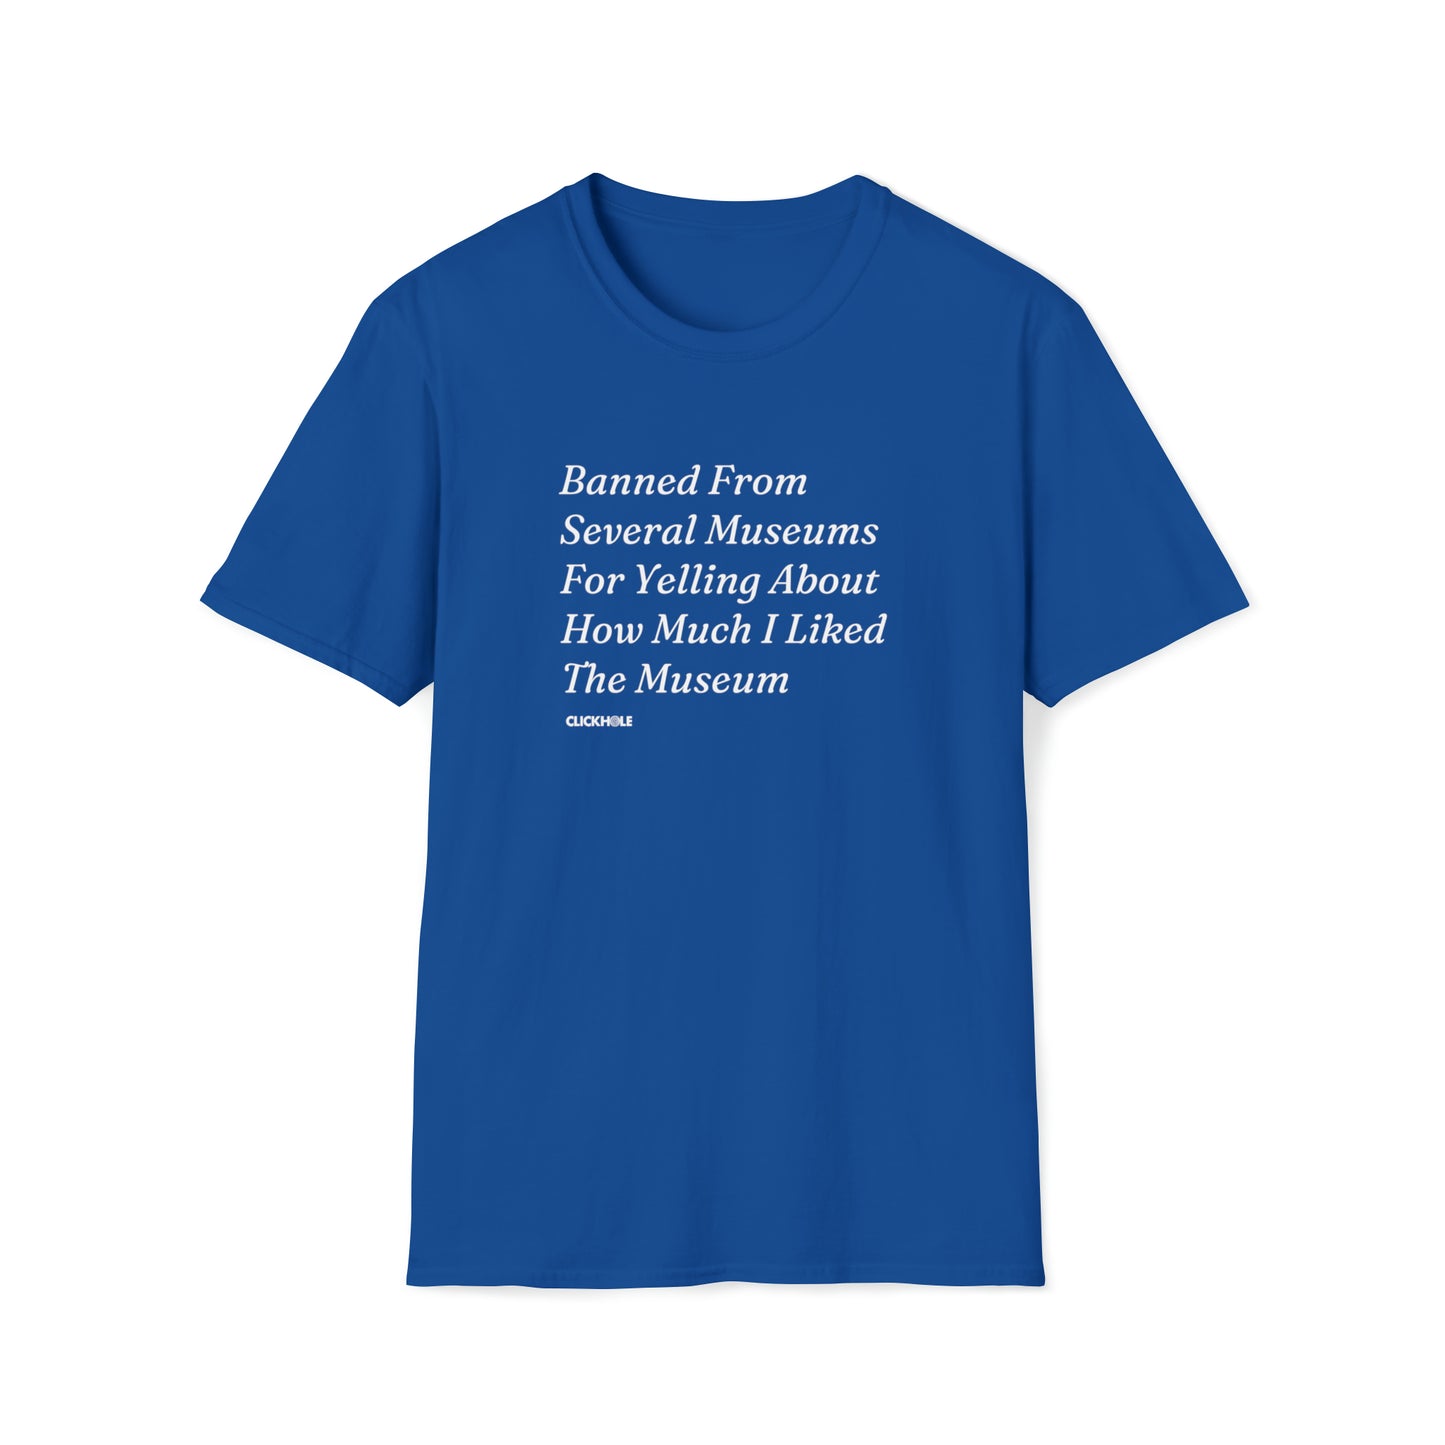 "Banned From Several Museums" Shirt